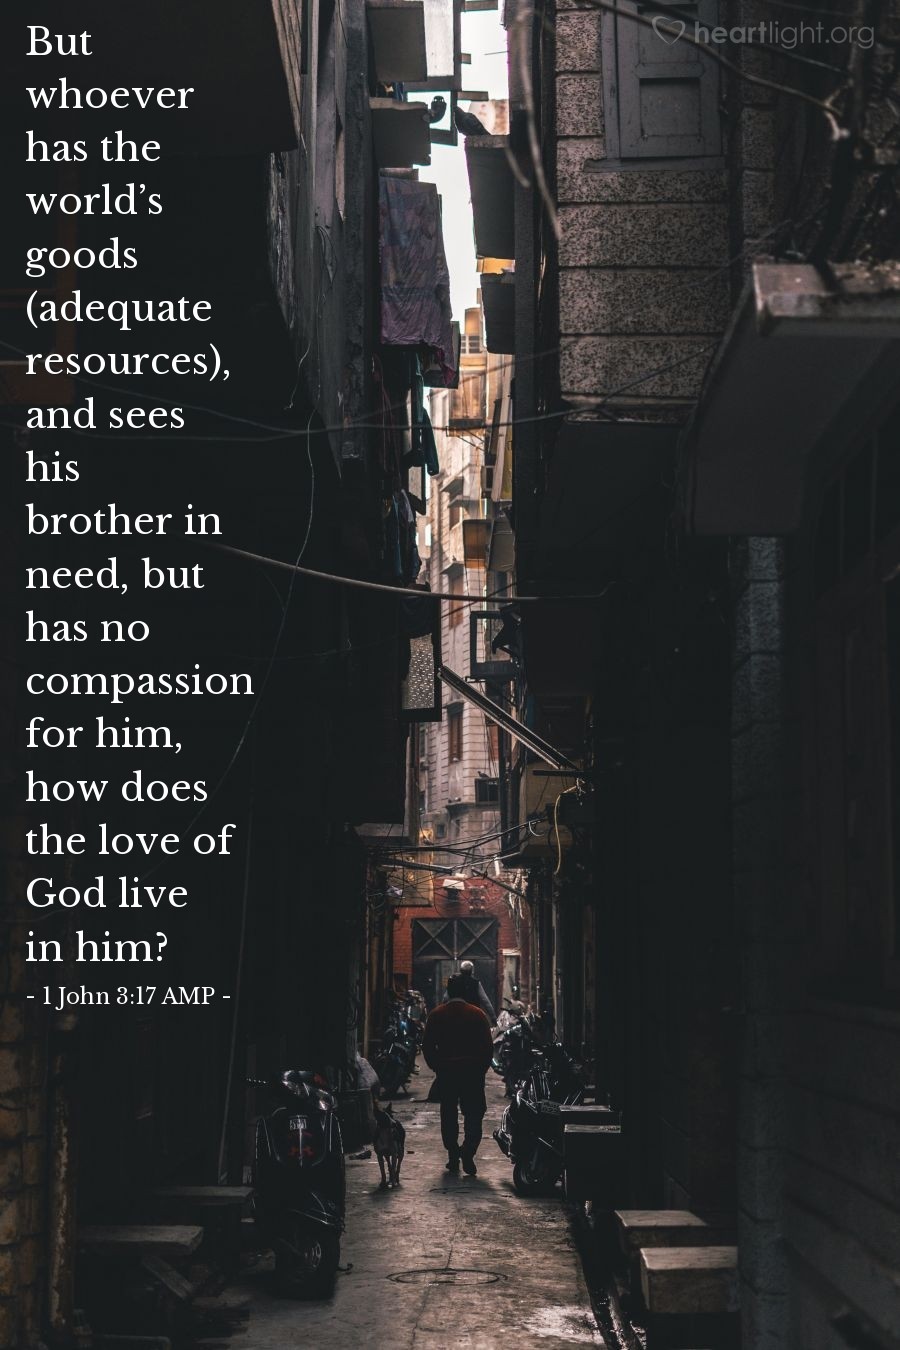 Illustration of 1 John 3:17 AMP — But whoever has the world’s goods (adequate resources), and sees his brother in need, but has no compassion for him, how does the love of God live in him?